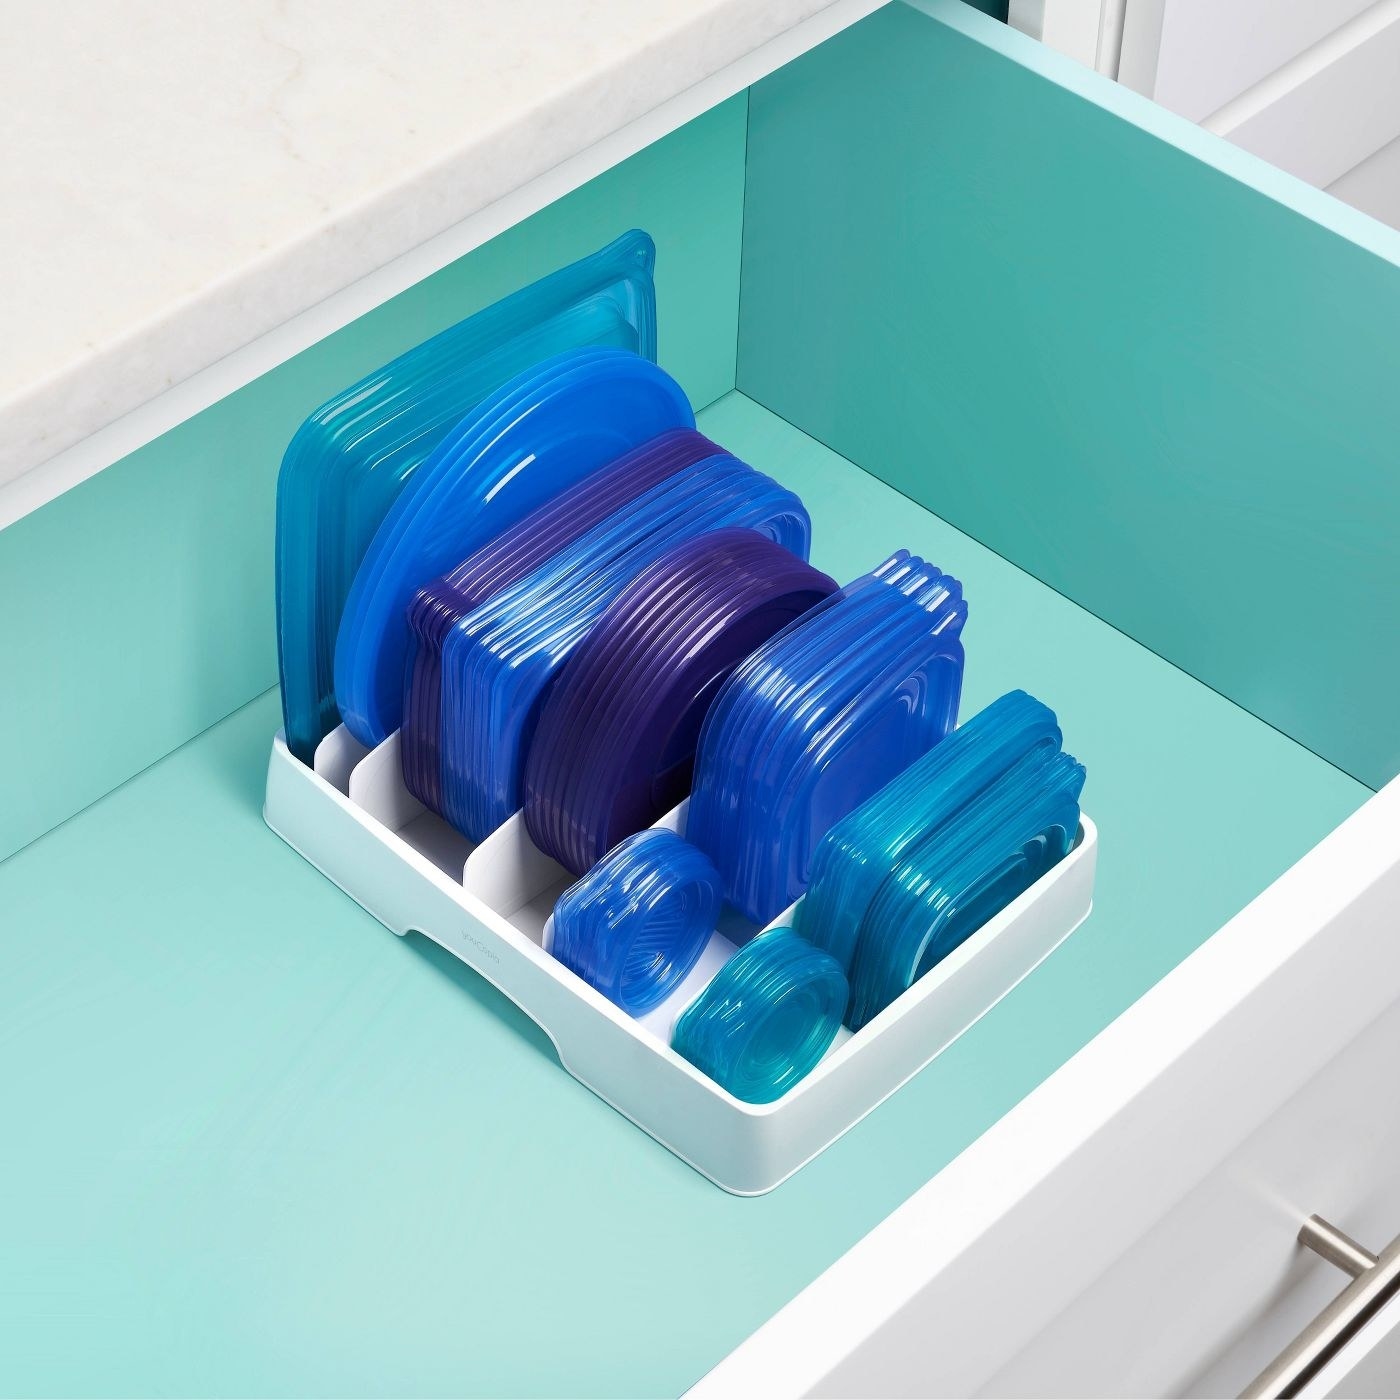 The container lid organizer